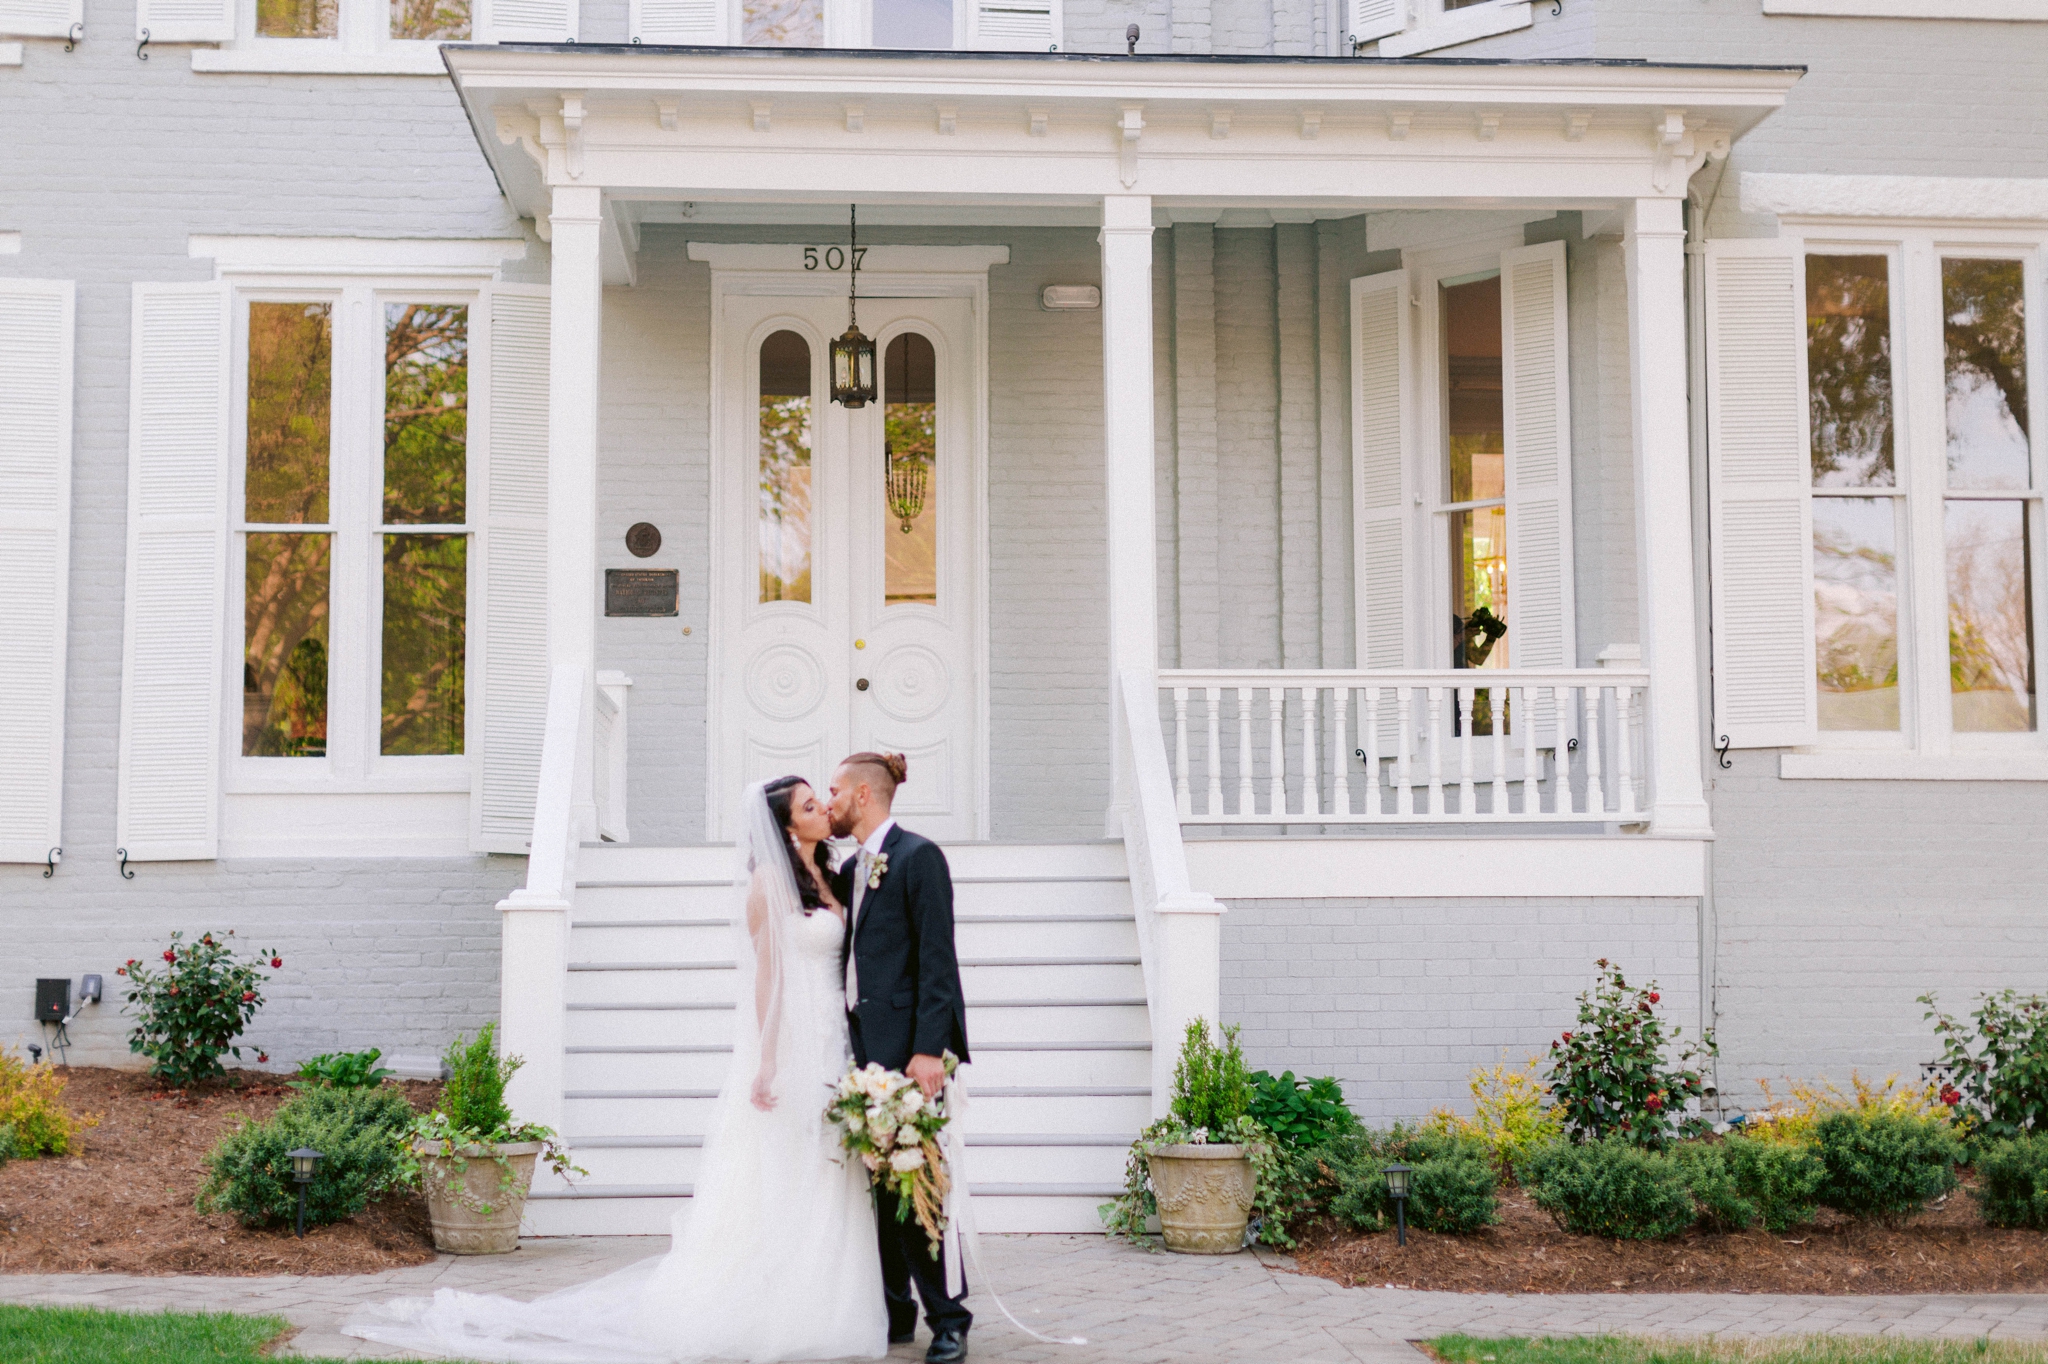  Couple Kissing in front of the mansion - Wedding Portraits on the front porch of an all white luxury estate  - Bride is wearing a Aline Ballgown by Cherish by Southern Bride with a long cathedral veil - Groom is wearing a black suit by Generation Tu